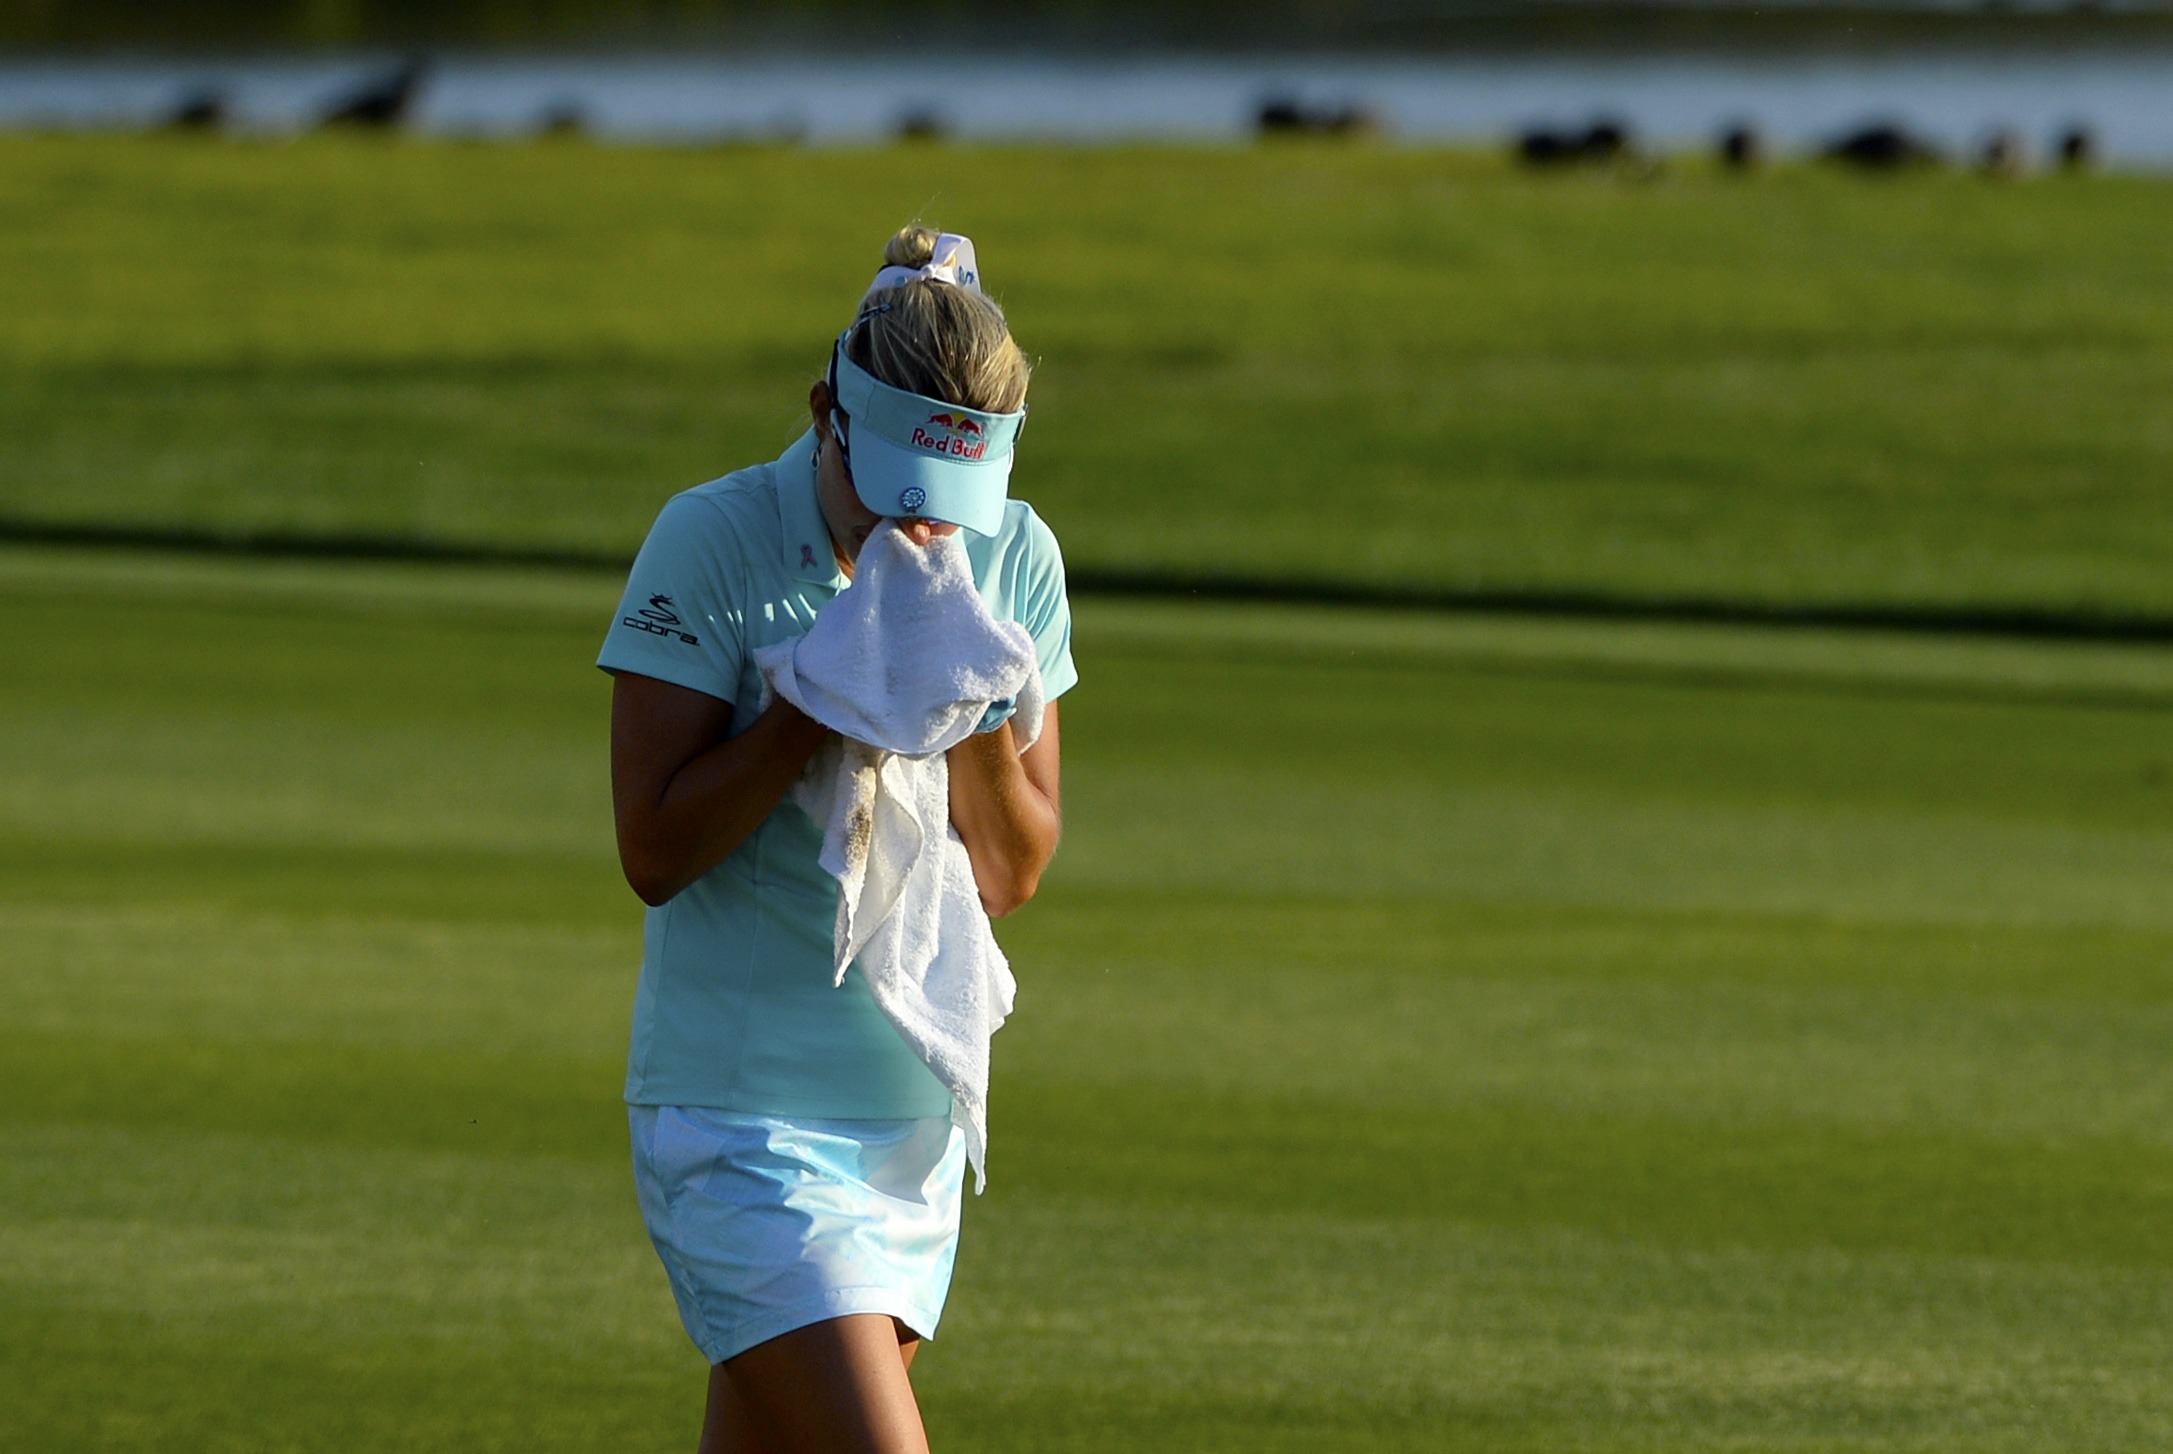 Lexi Thompson rules controversy highlights golf's glaring problems